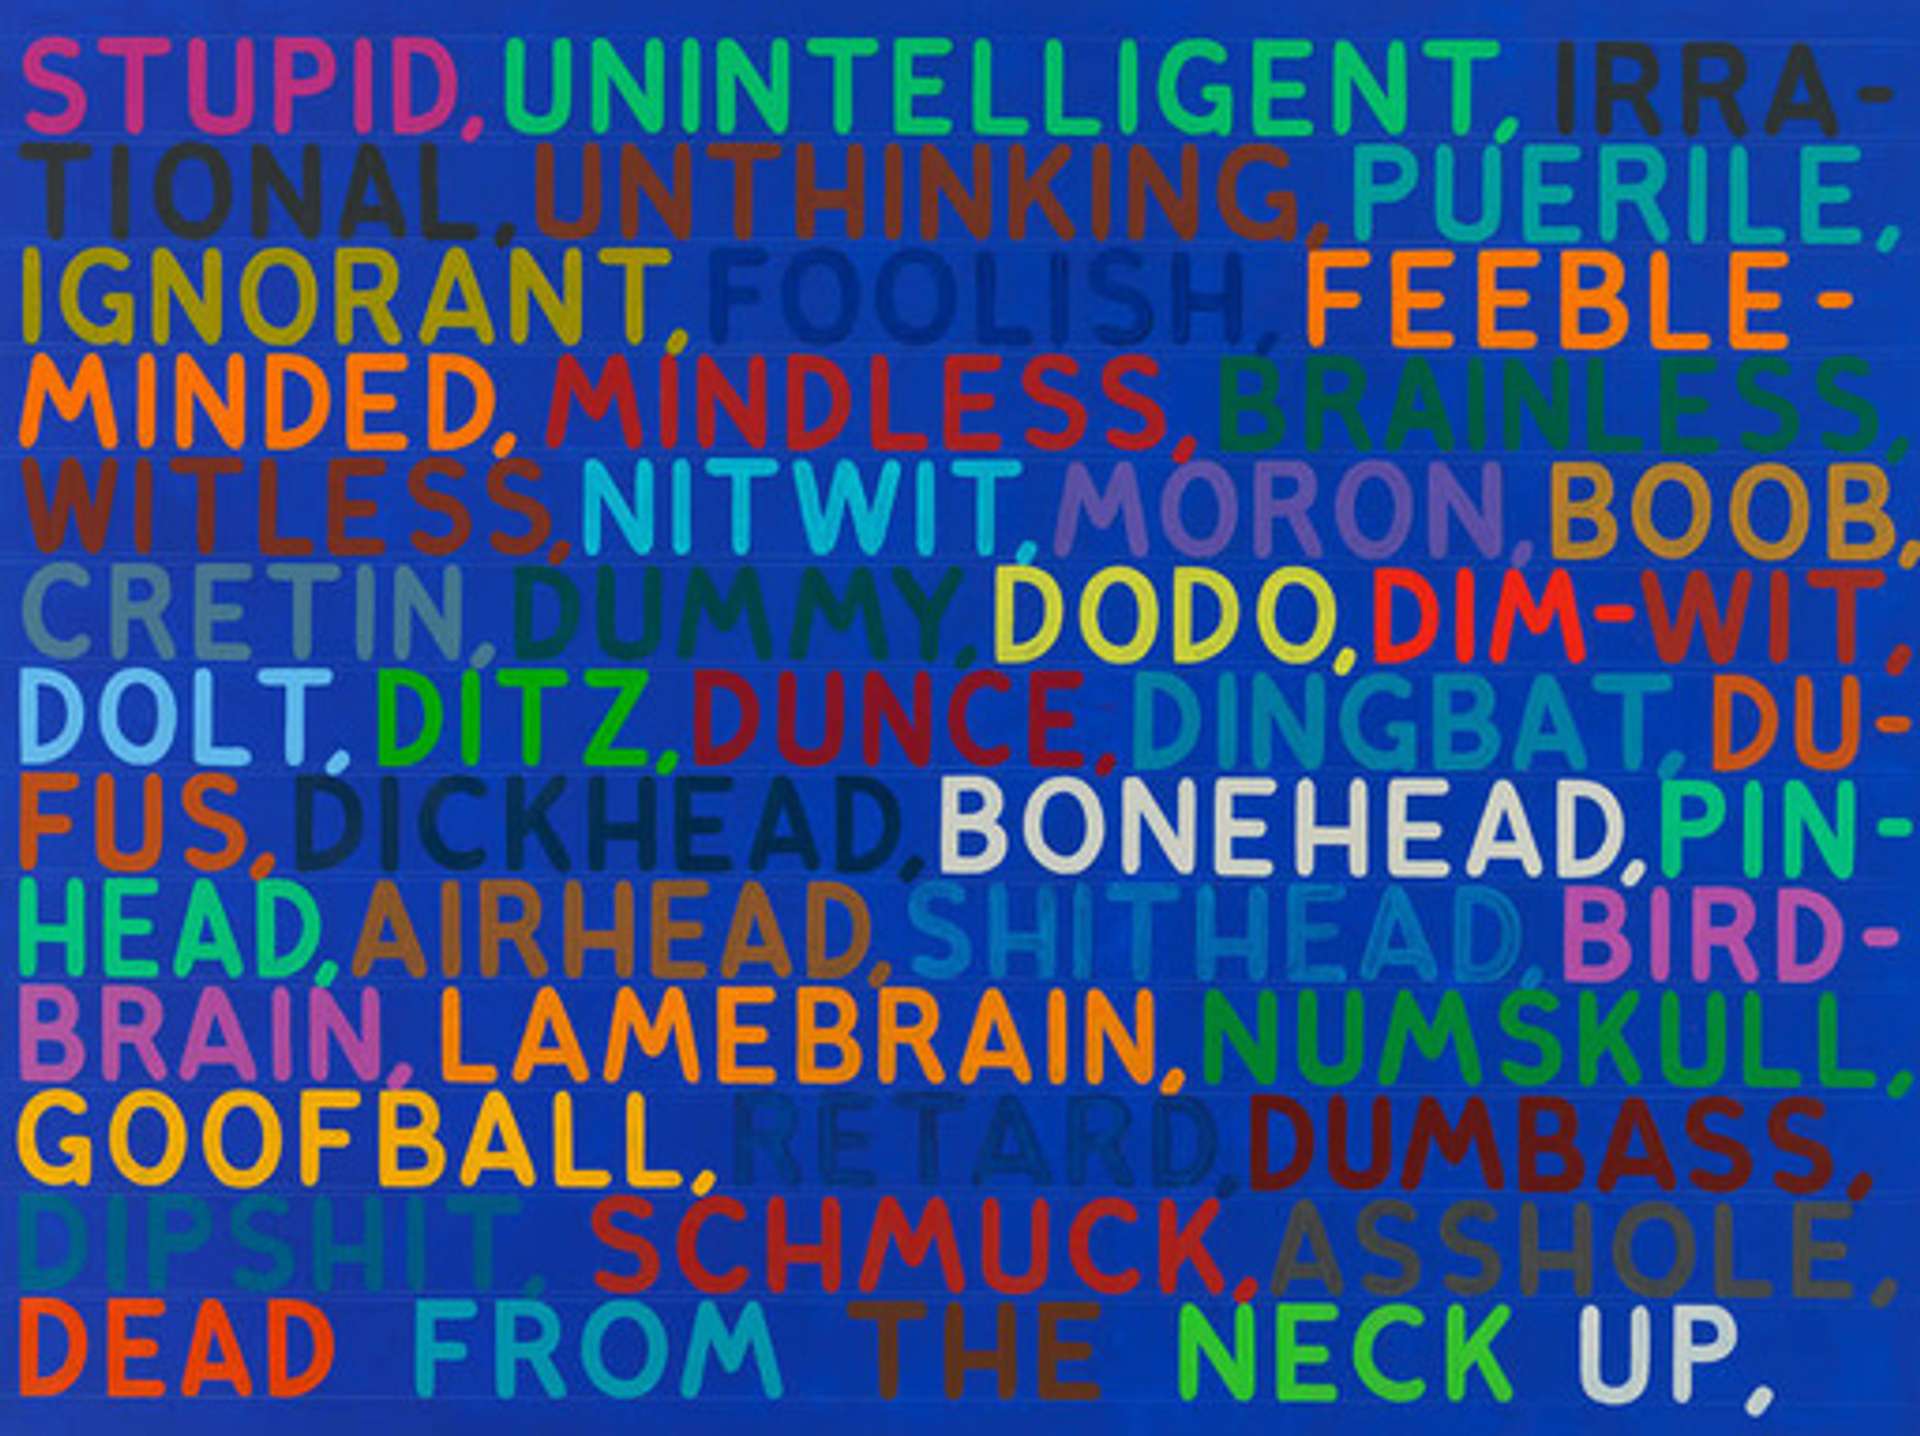 An artwork with a vibrant blue background adorned with stenciled, capital letters in contrasting vibrant colors. The letters spell out various one-word insults such as "stupid, unintelligent, irrational, ignorant, foolish, feeble-minded," and more.